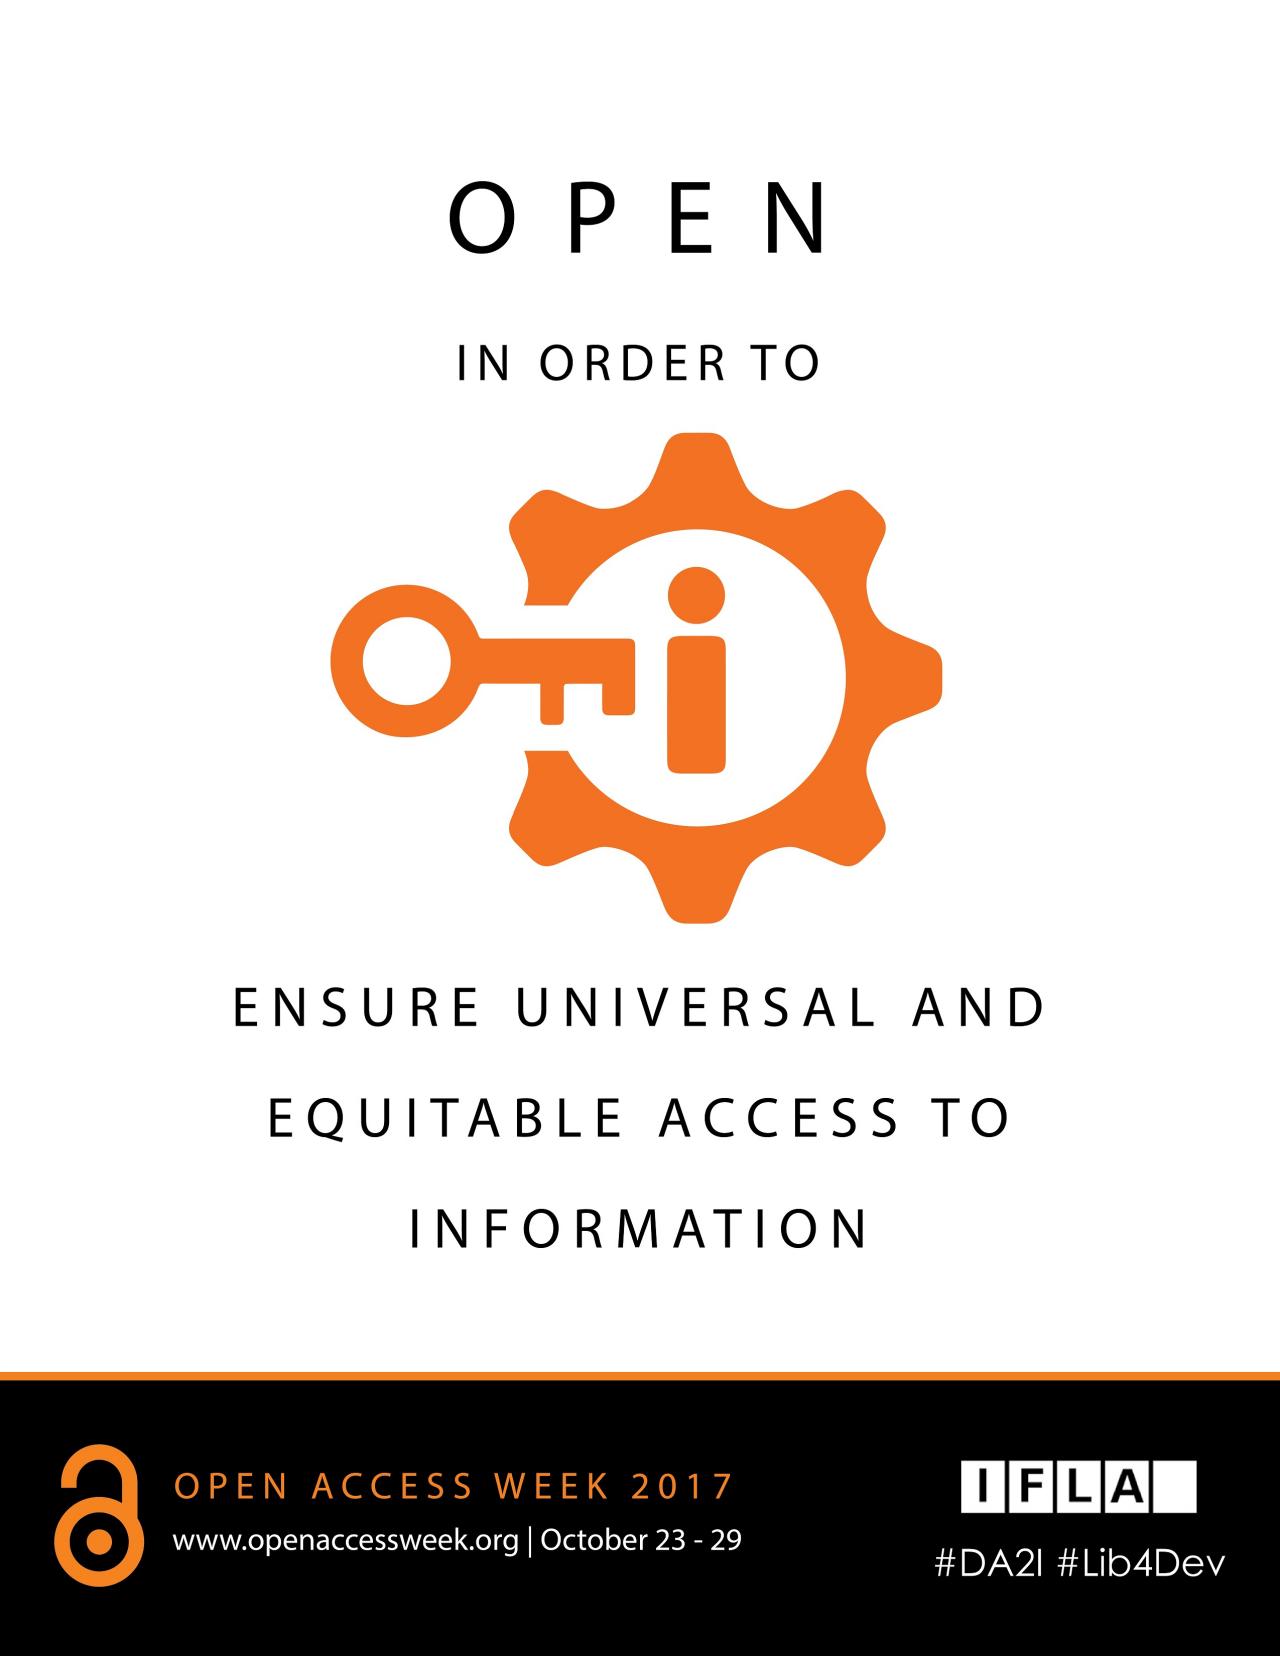 Open in order to ensure universal and equitable access to information